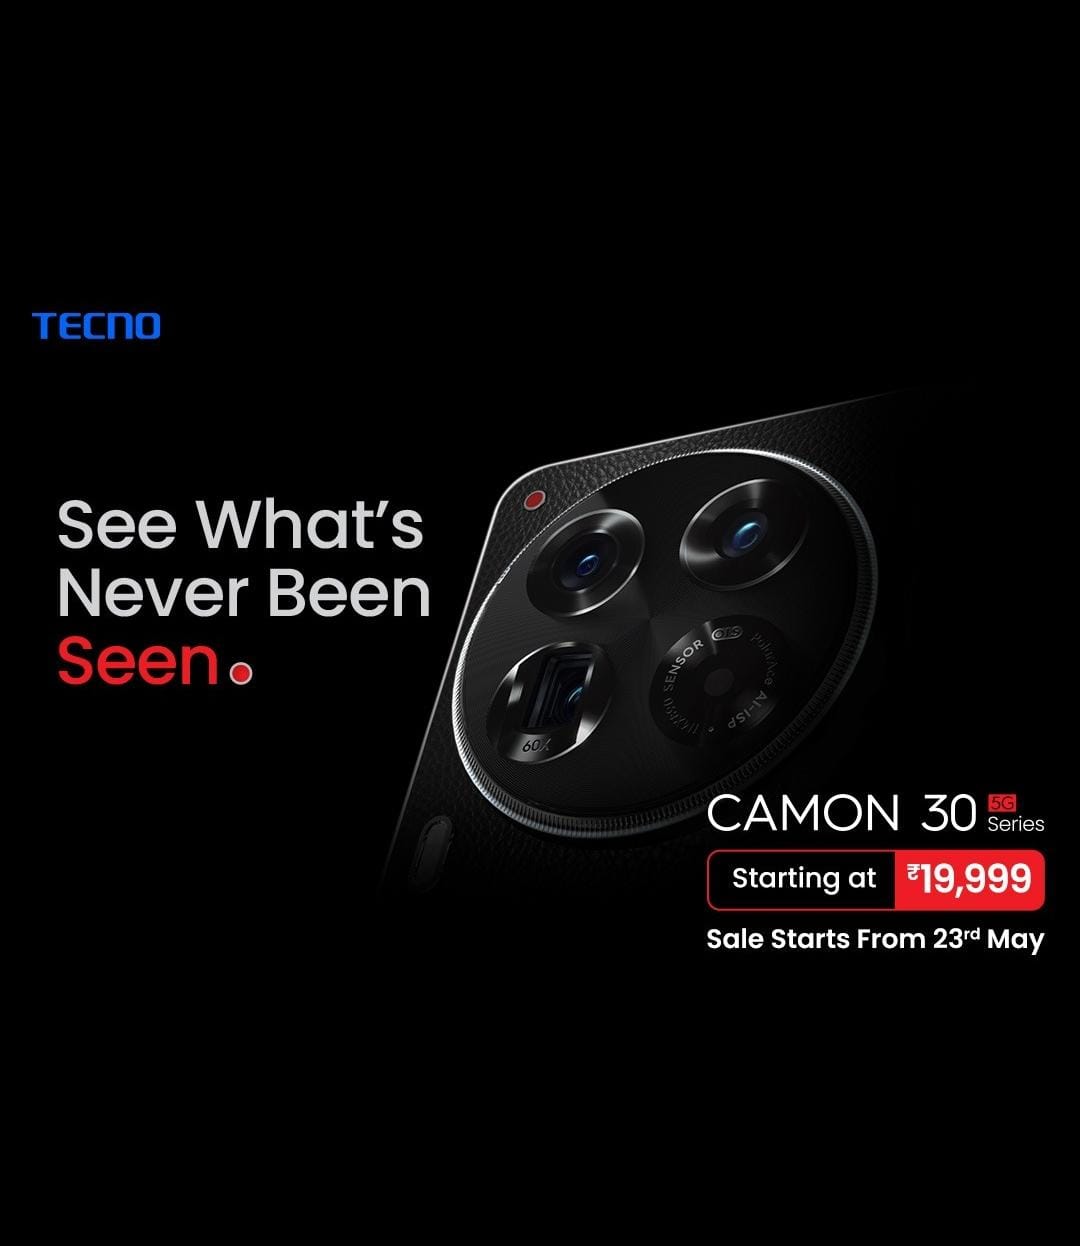 Camera Master TECNO Camon 30 Series Launched Offering Tech+Style